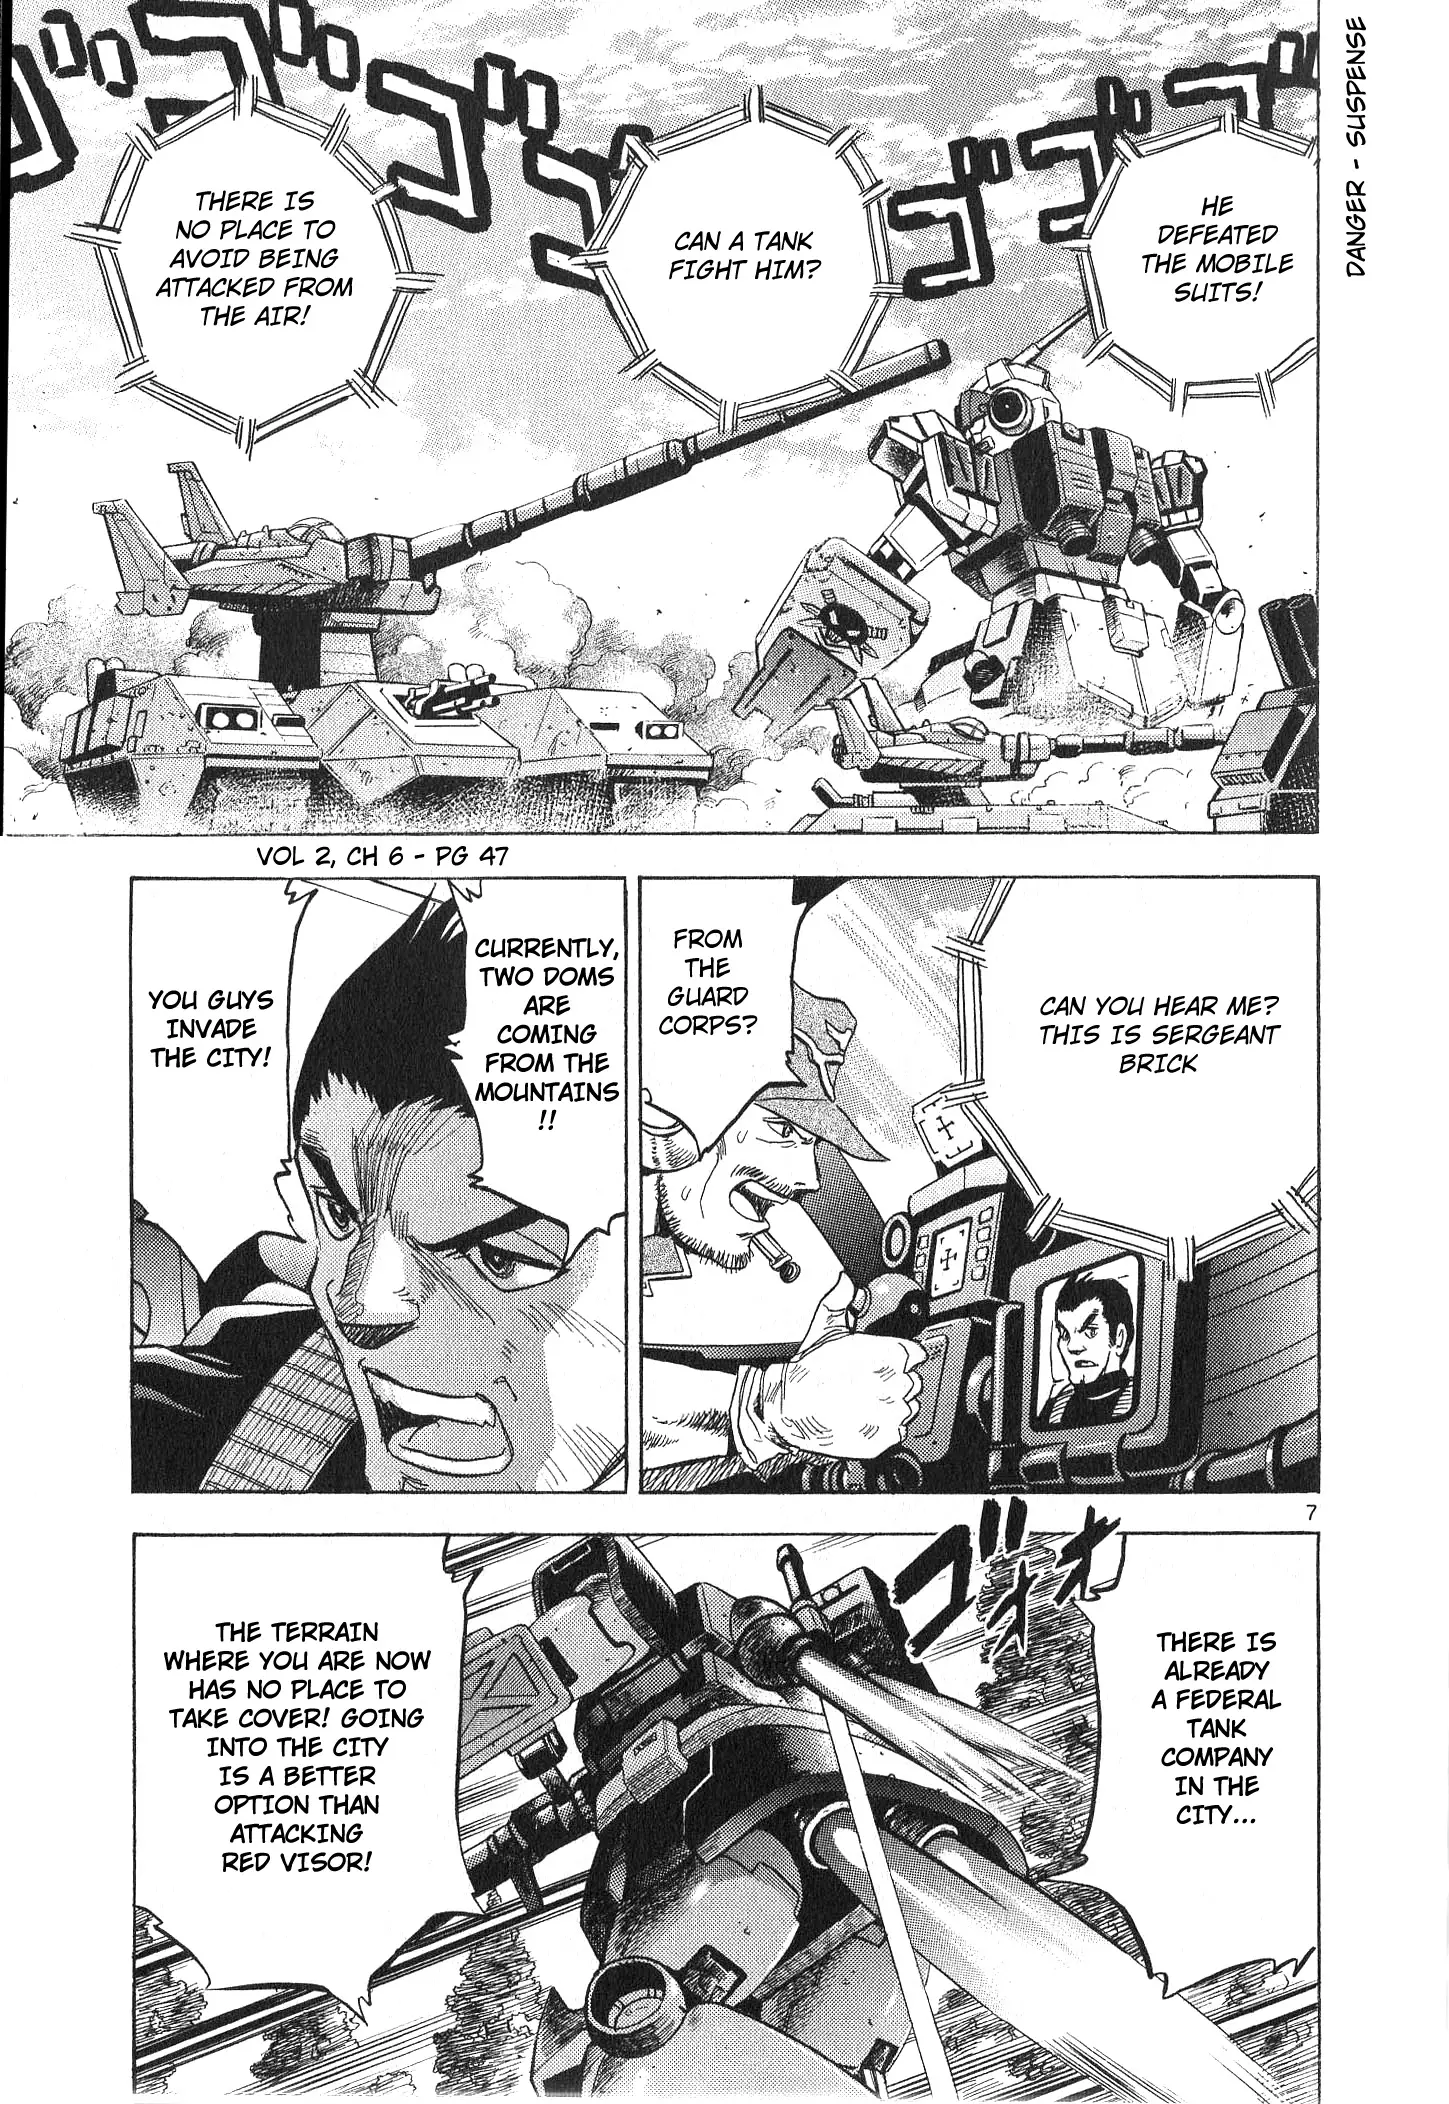 Mobile Suit Gundam Aggressor - 6 page 7-2585d2aa